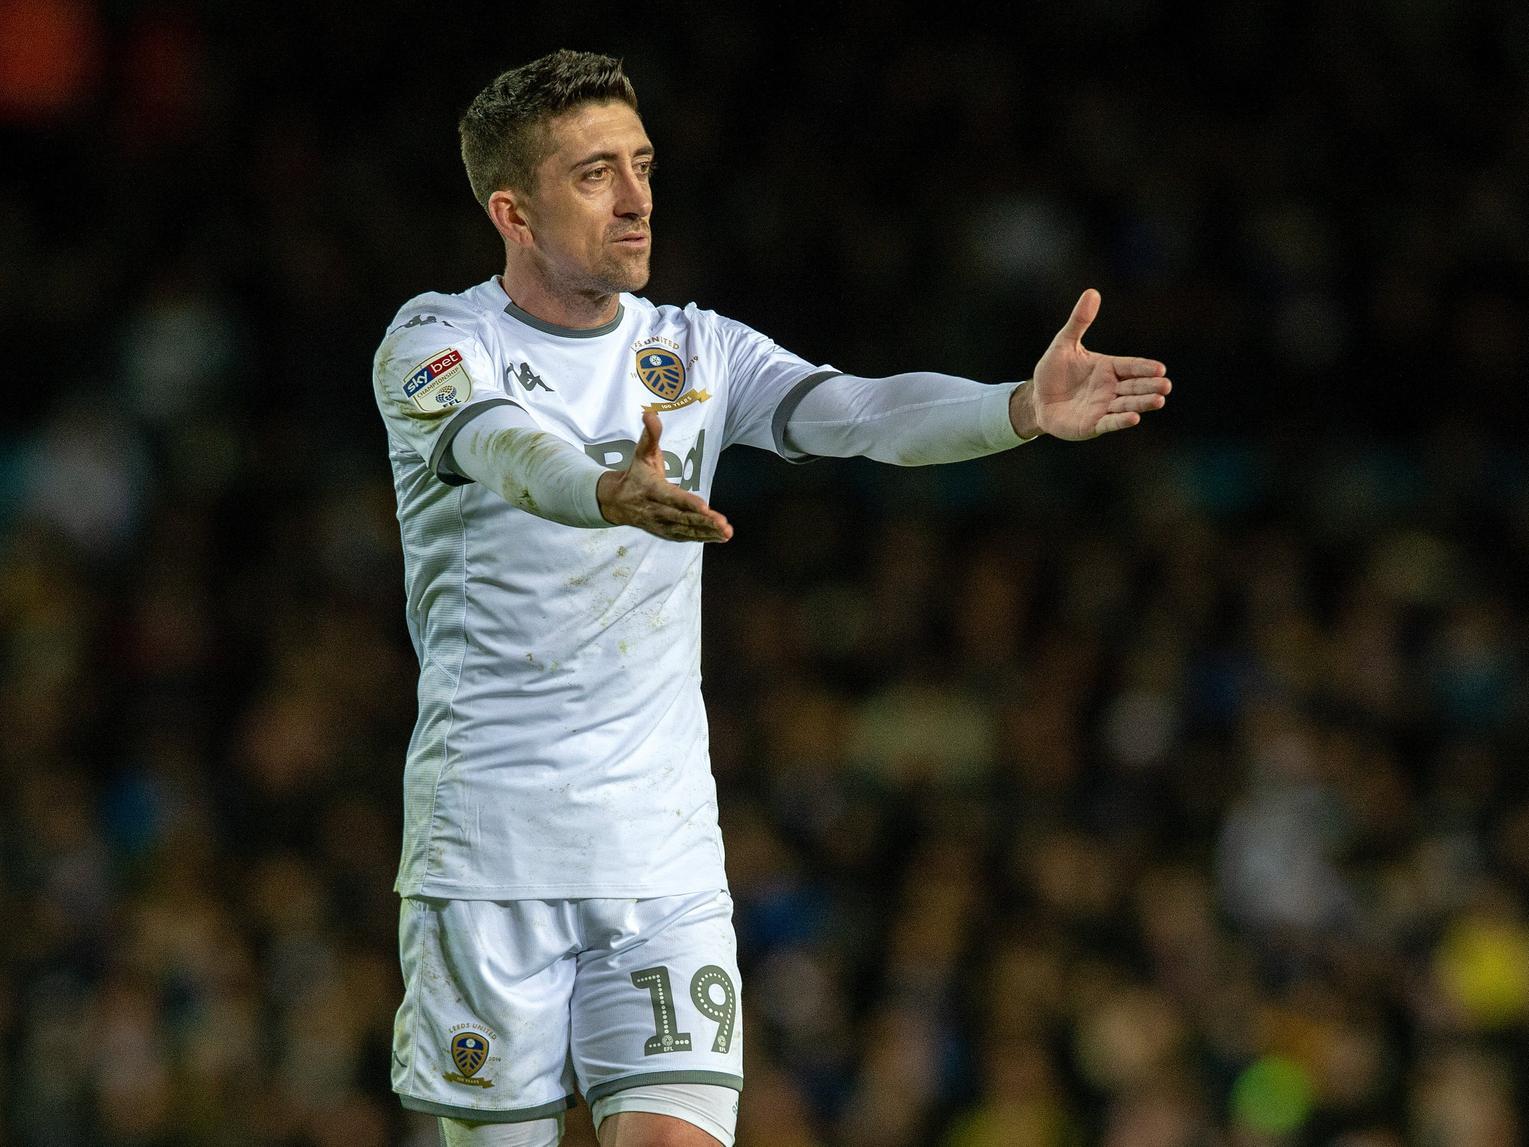 The wizard. Was back to his best against Millwall. Leeds will need that form in the coming months.